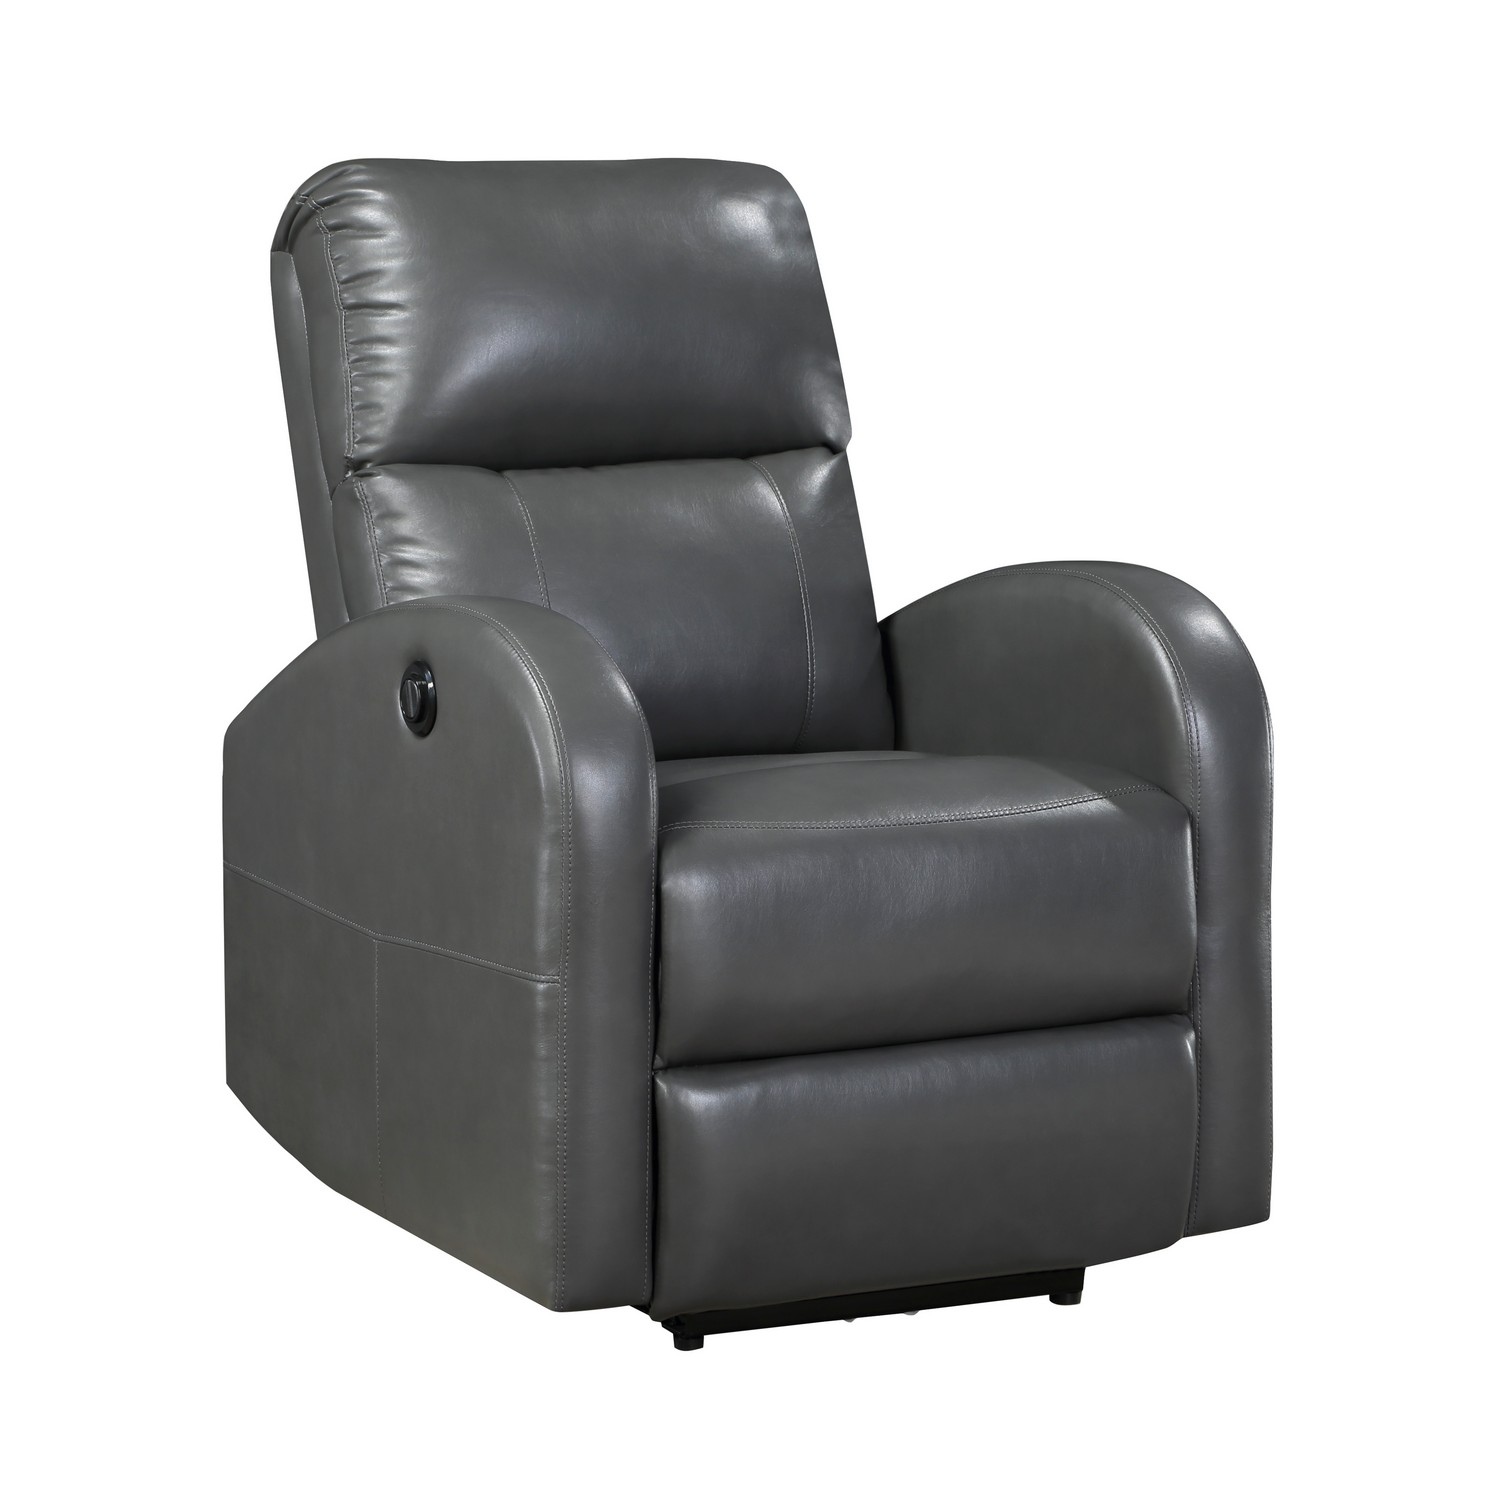 Homelegance Wiley Power Reclining Chair - Gray